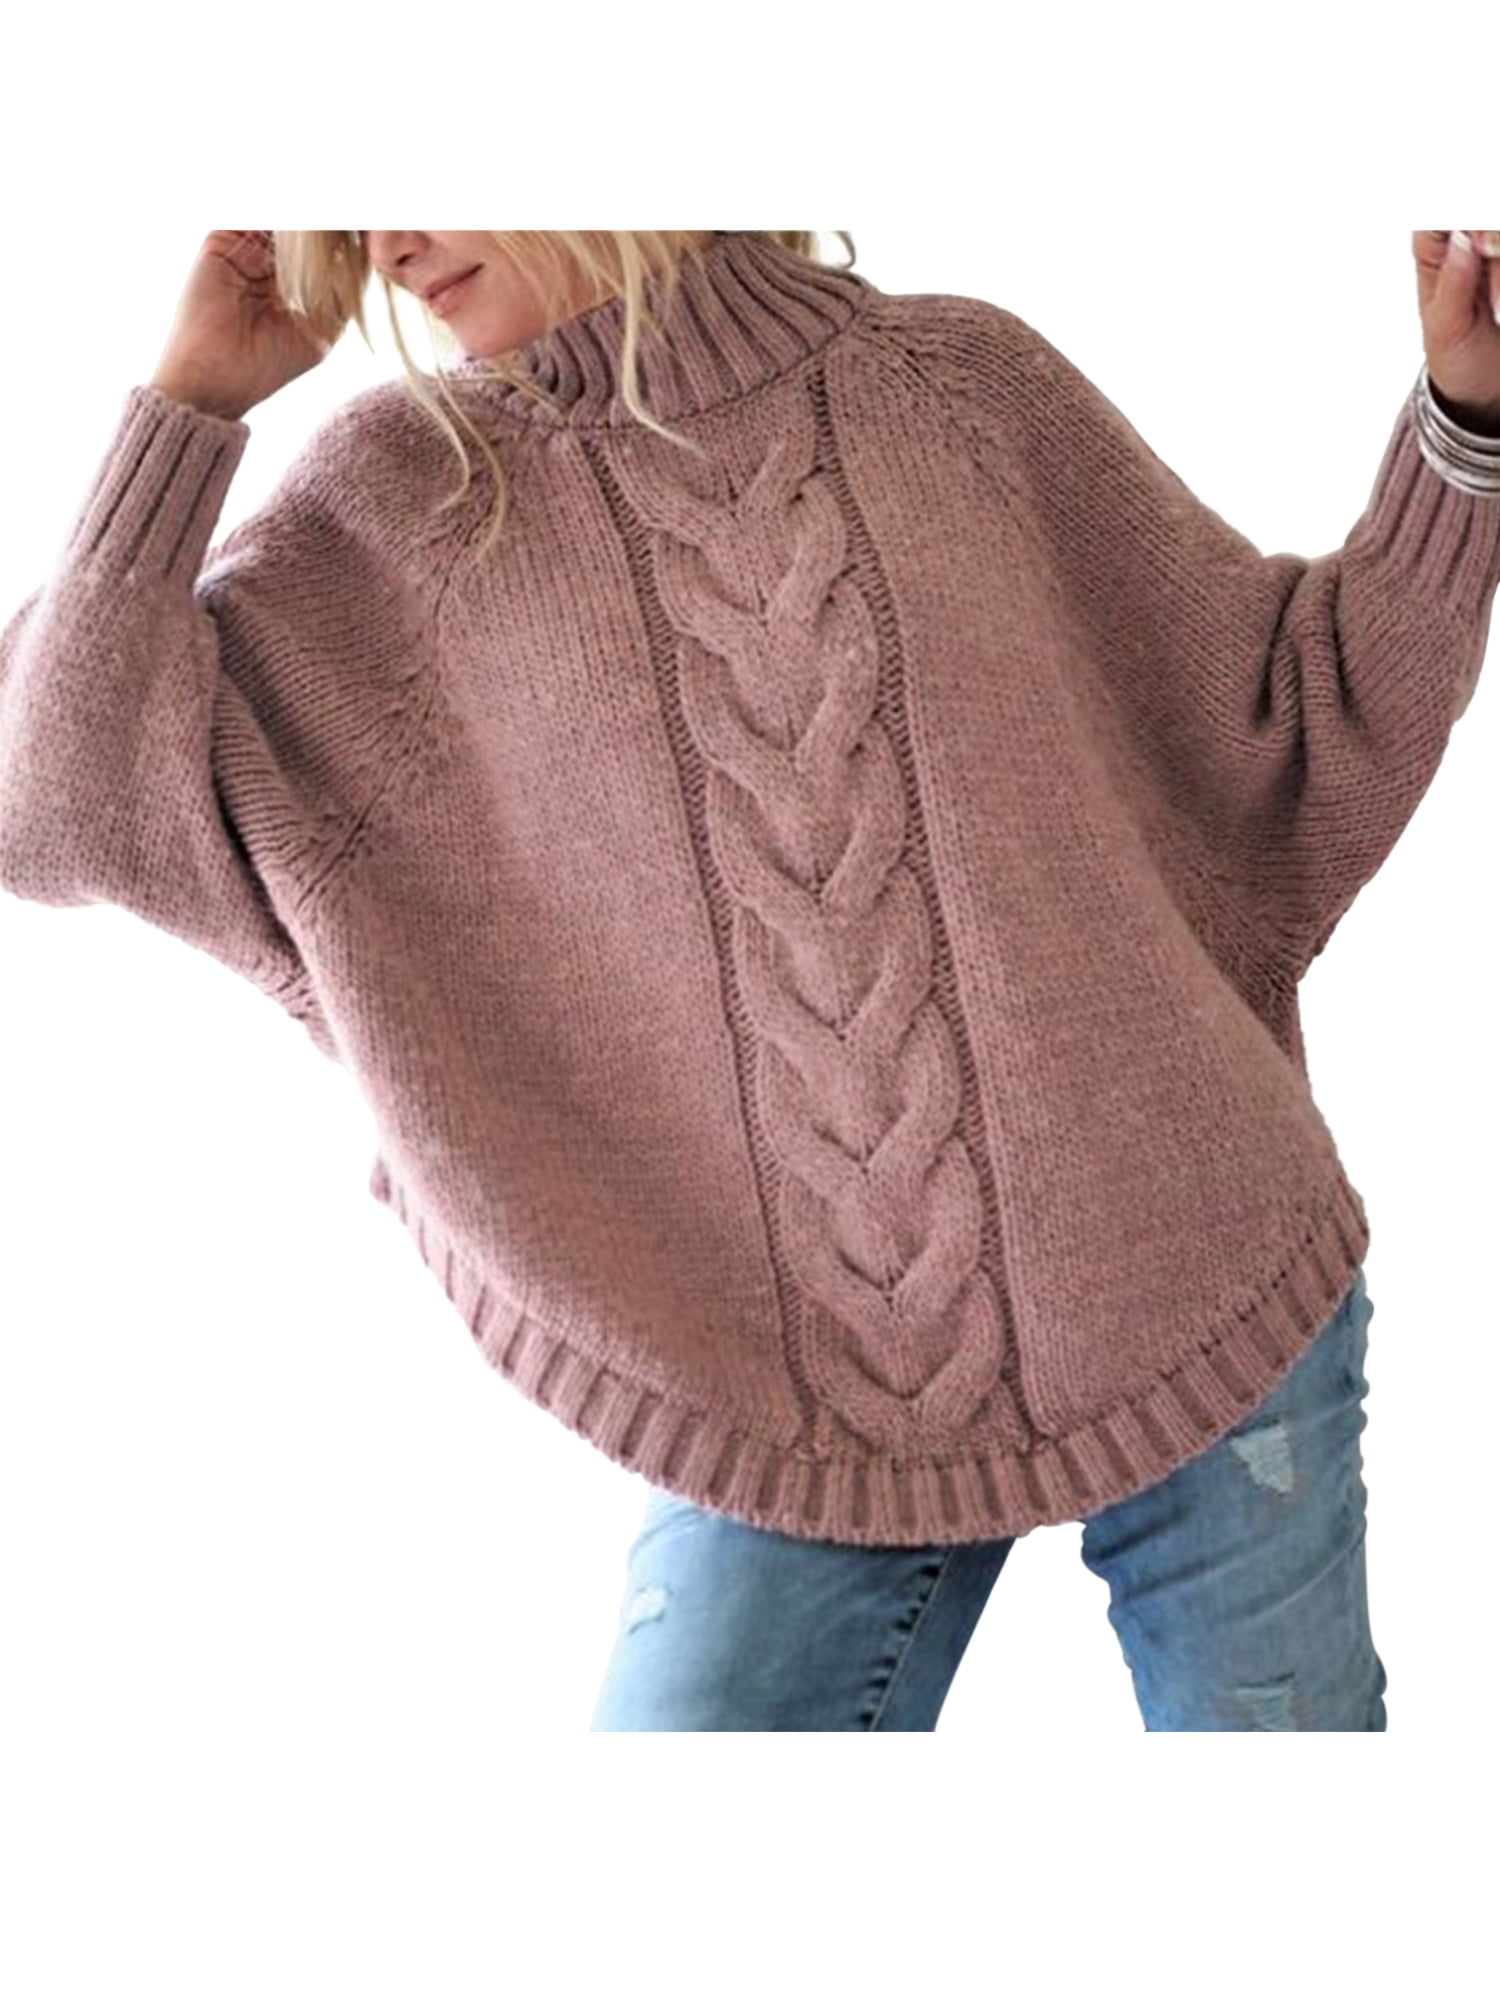 KCatsy Womens Jumper Sweater Knitted Top Plus Size Batwing Long Sleeve Oversize Baggy Loose Soft Ladies Blouse Knitwear